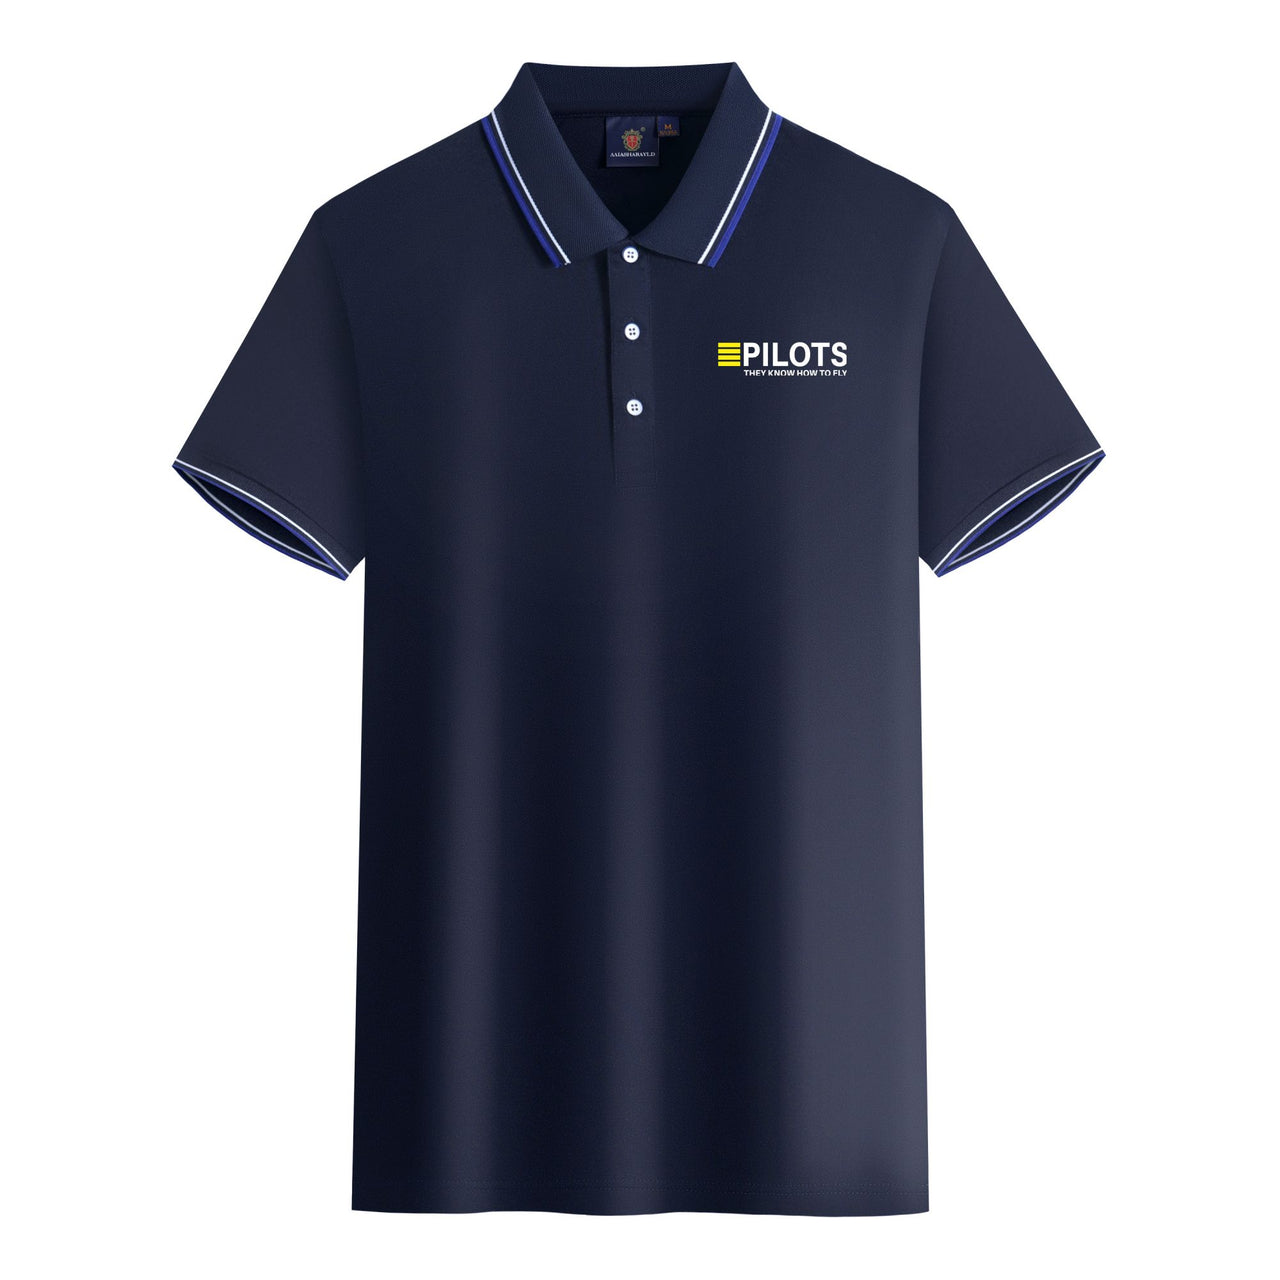 Pilots They Know How To Fly Designed Stylish Polo T-Shirts